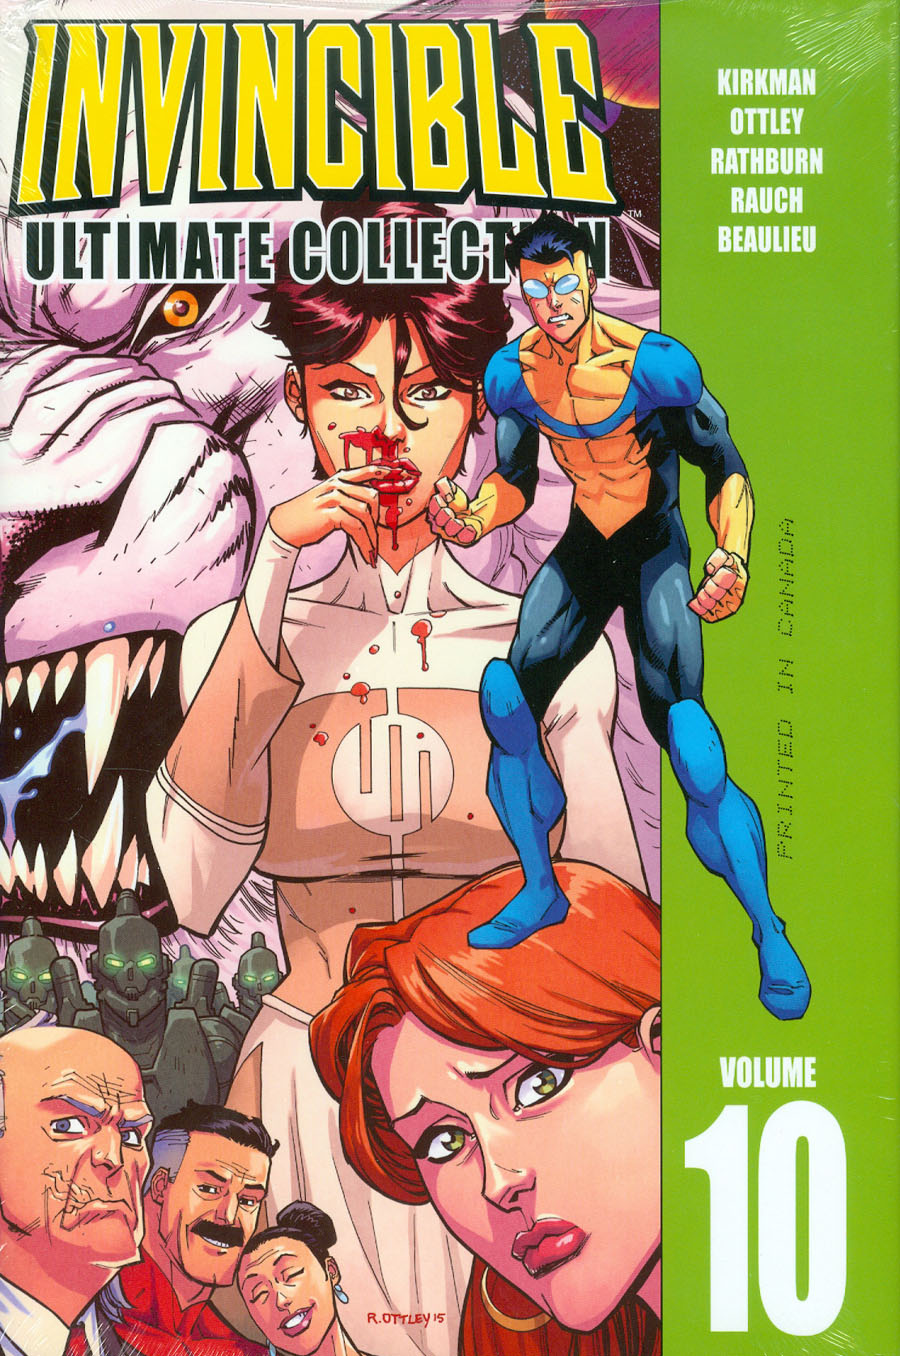 Invincible Ultimate Collection Vol 10 HC